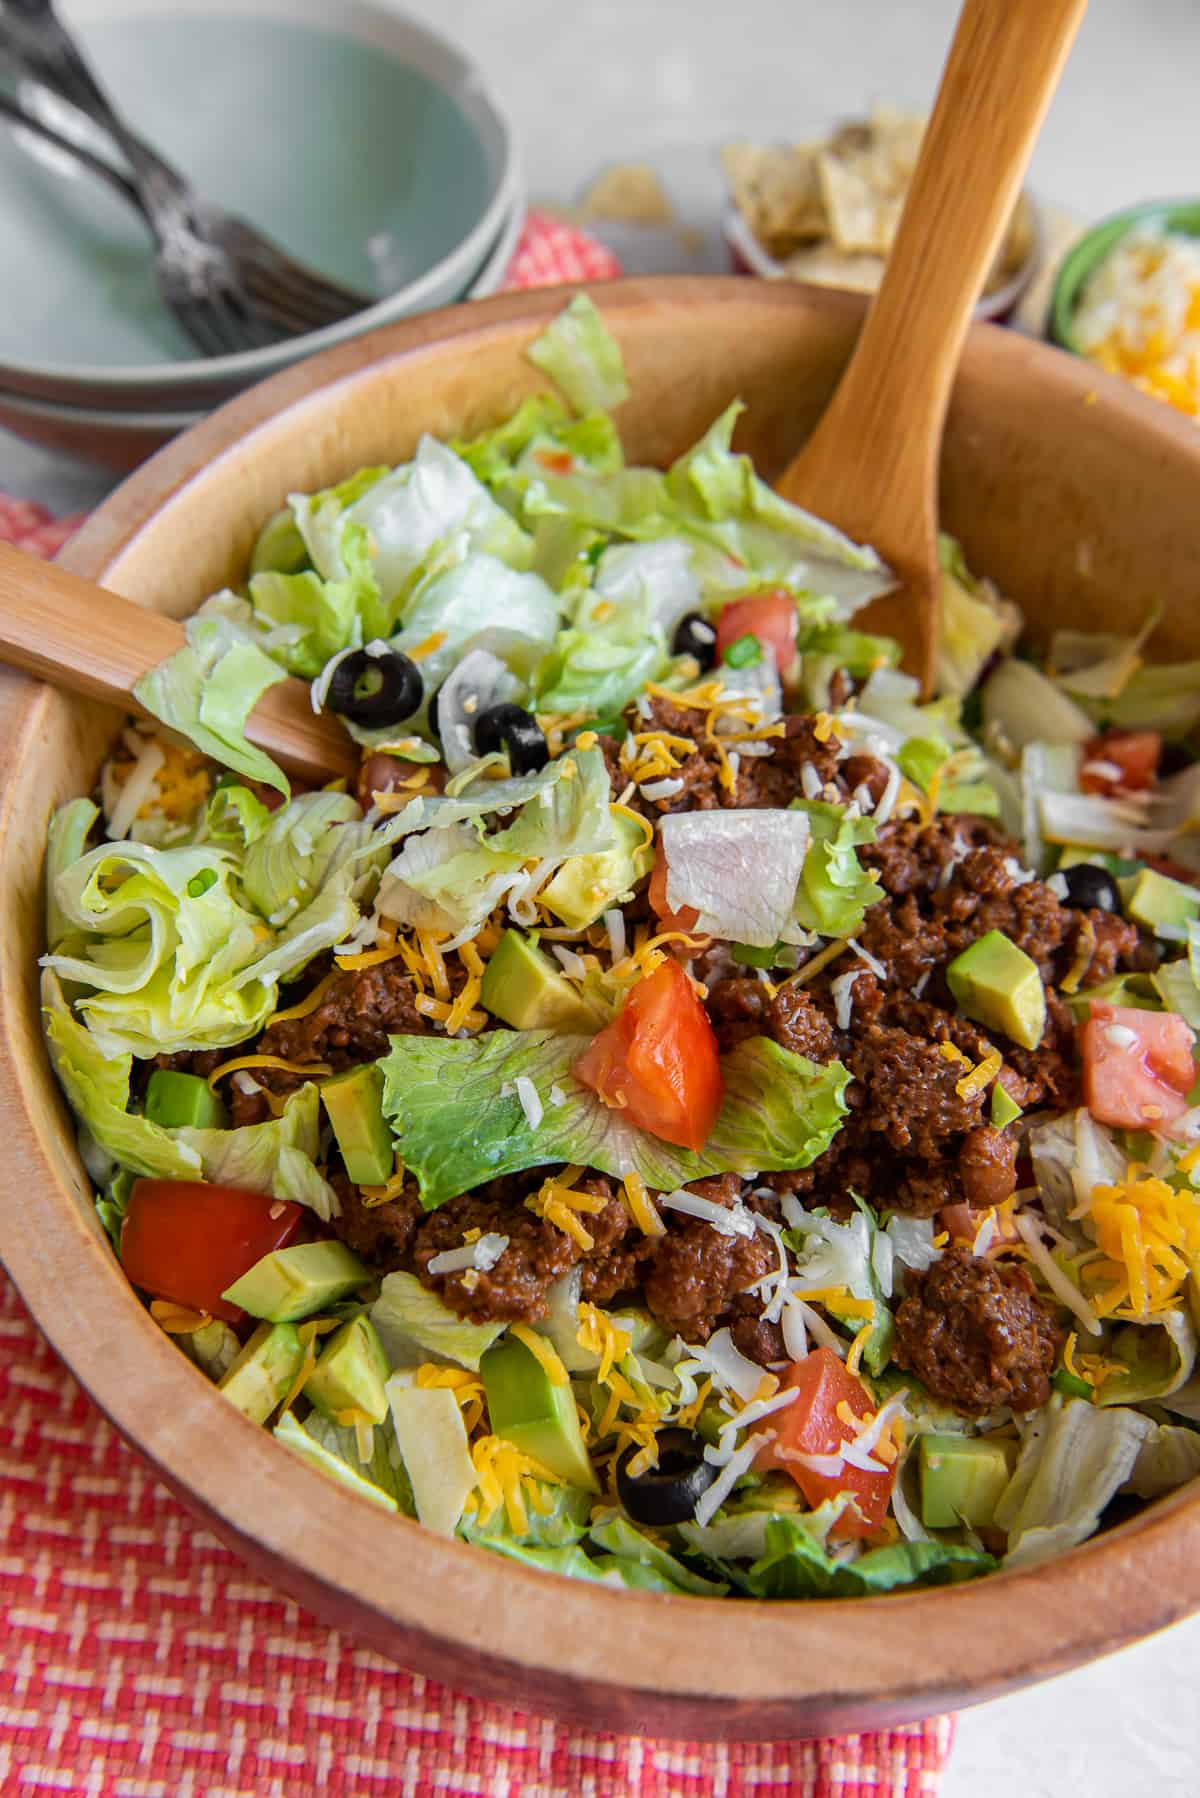 Wood salad spoons resting in a bowl of taco salad.